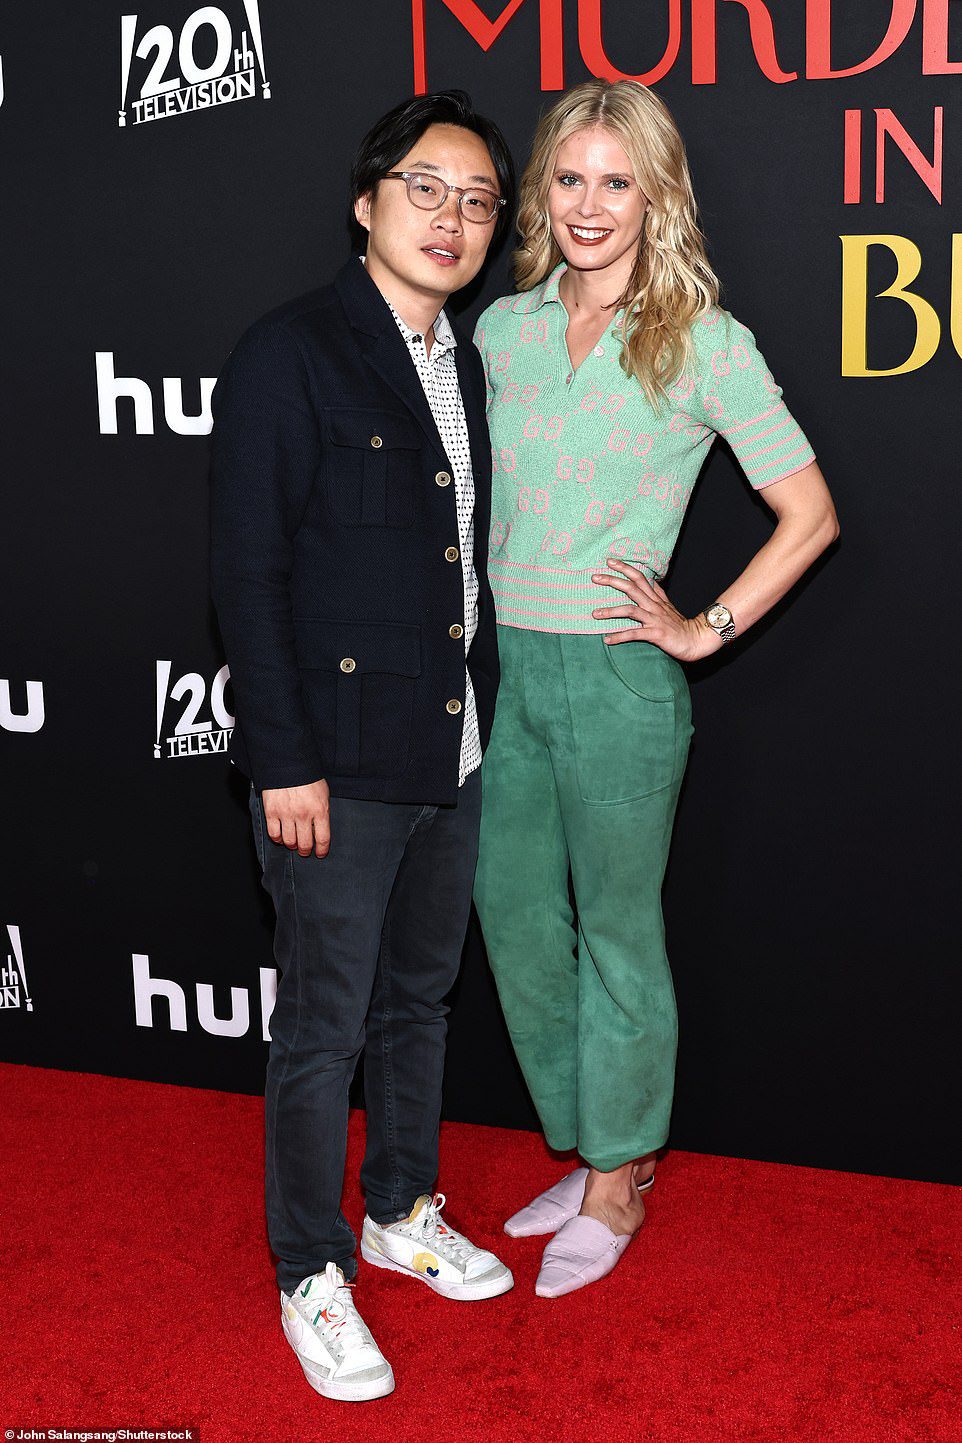 All smiles: Jimmy O. Yang approaches his girlfriend Bri Kimmell at the 'Only Murders in the Building' premiere